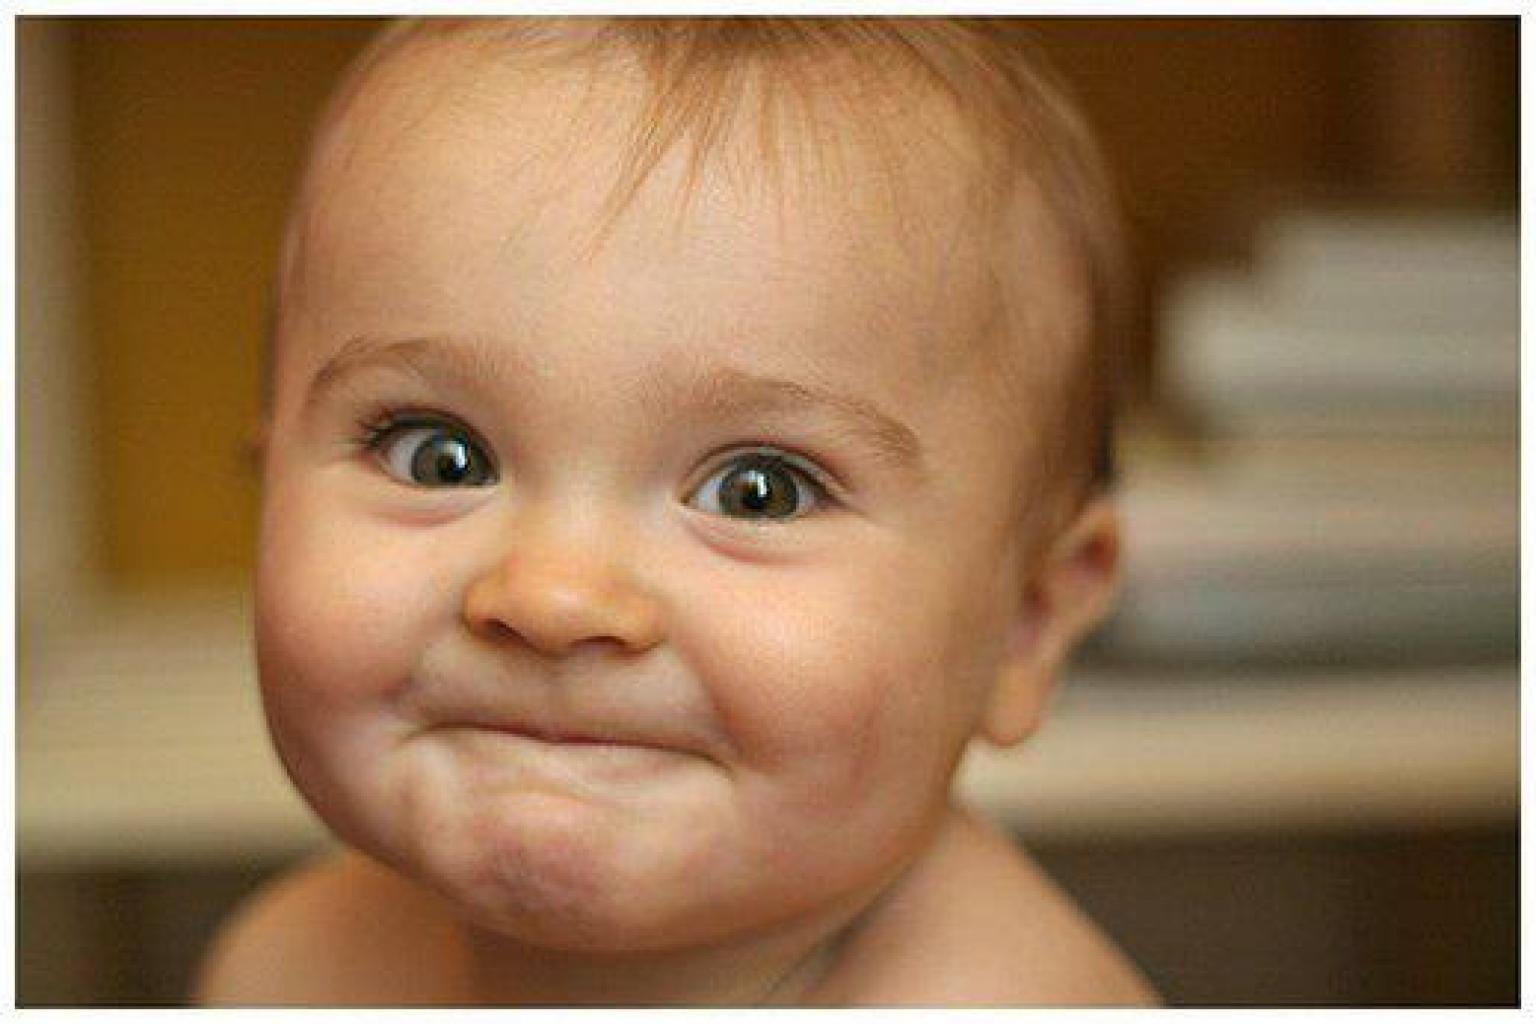 Baby Funny Smile Face Image